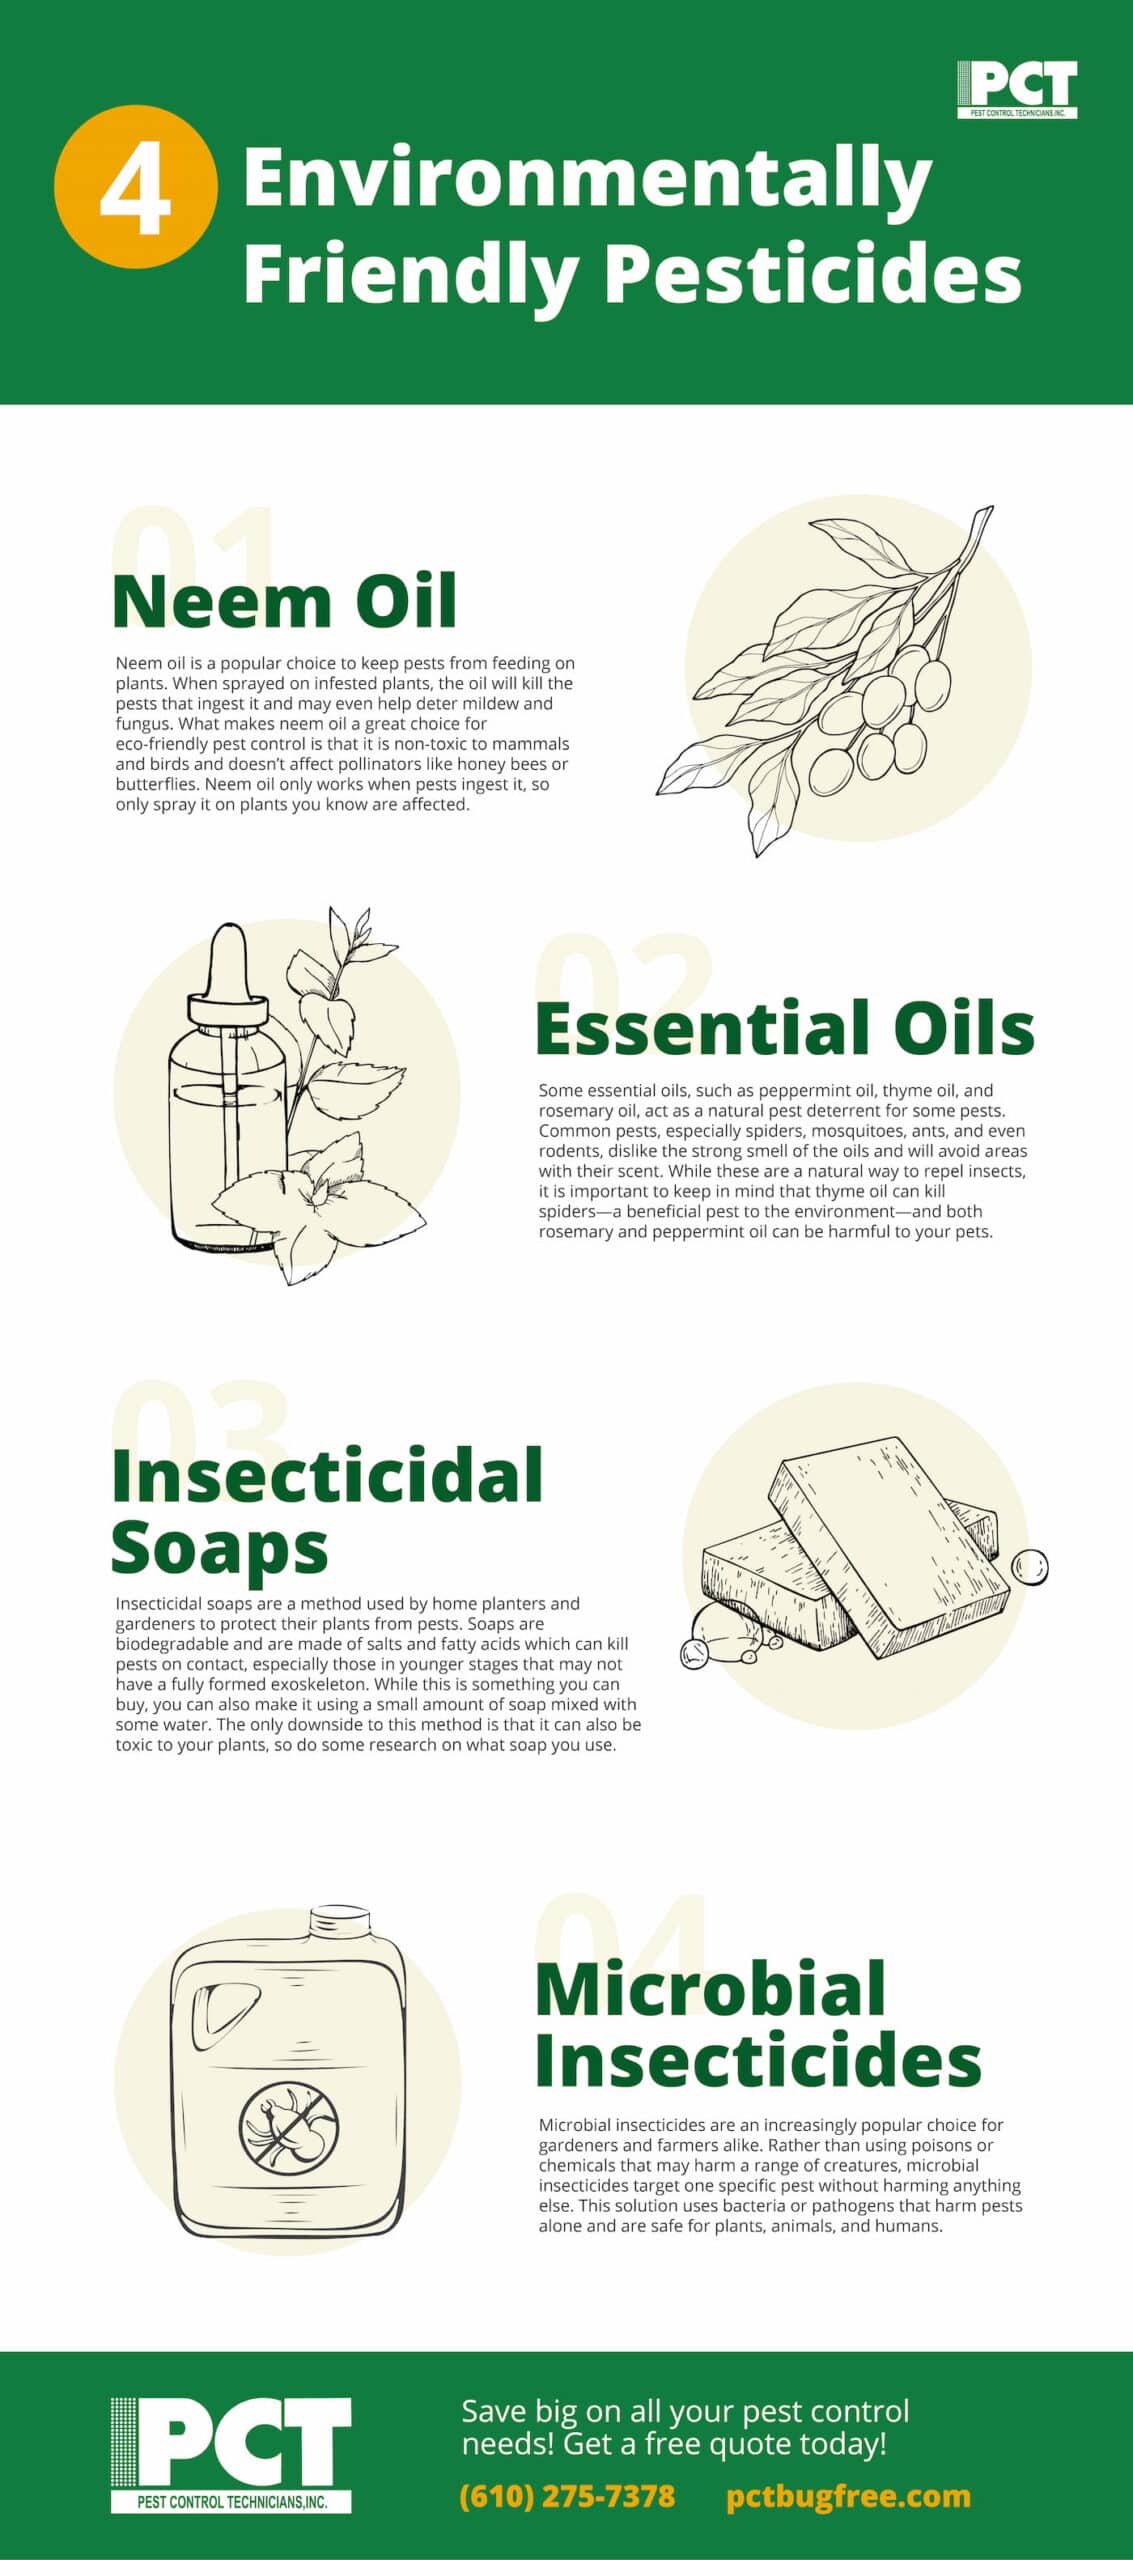 Infographic of eco-friendly pesticides which name the following 5 options: neem oil, essential oils, diatomaceous earth, microbial insecticides, and insecticidal soaps